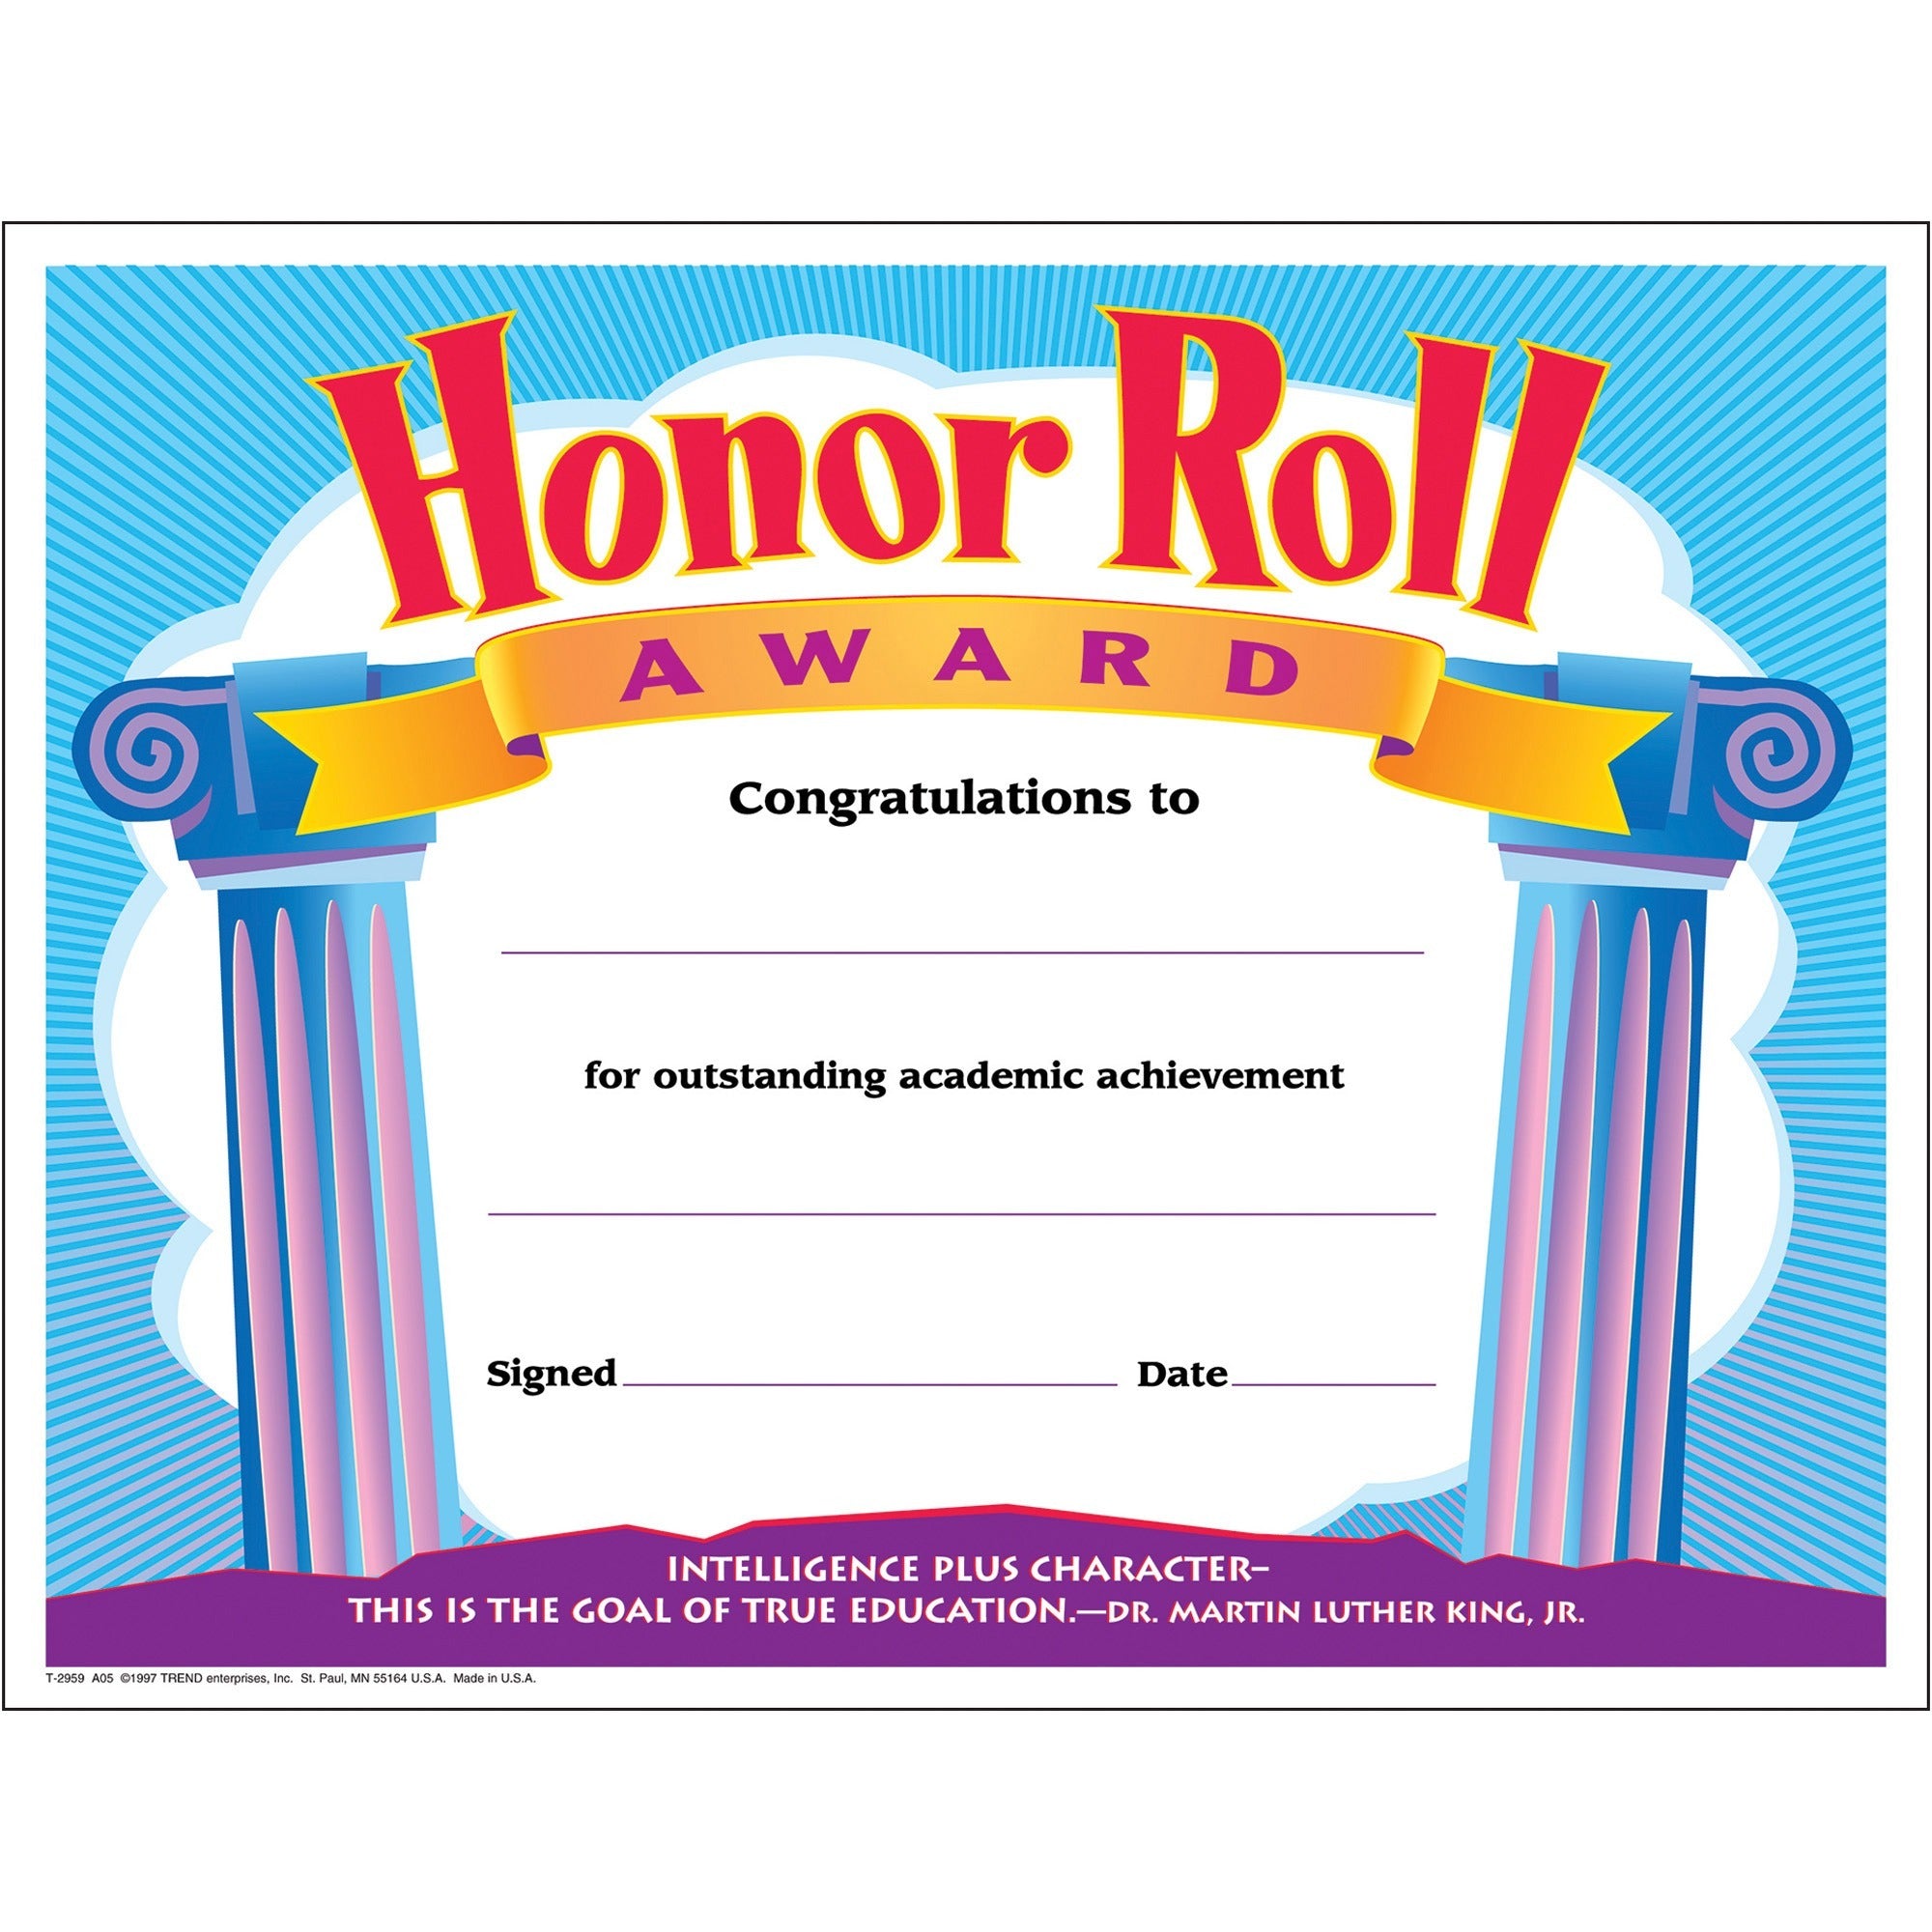 Trend Honor Roll Award Certificate - "Honor Roll Award" - 8.5" x 11" - Assorted - 30 / Pack - 